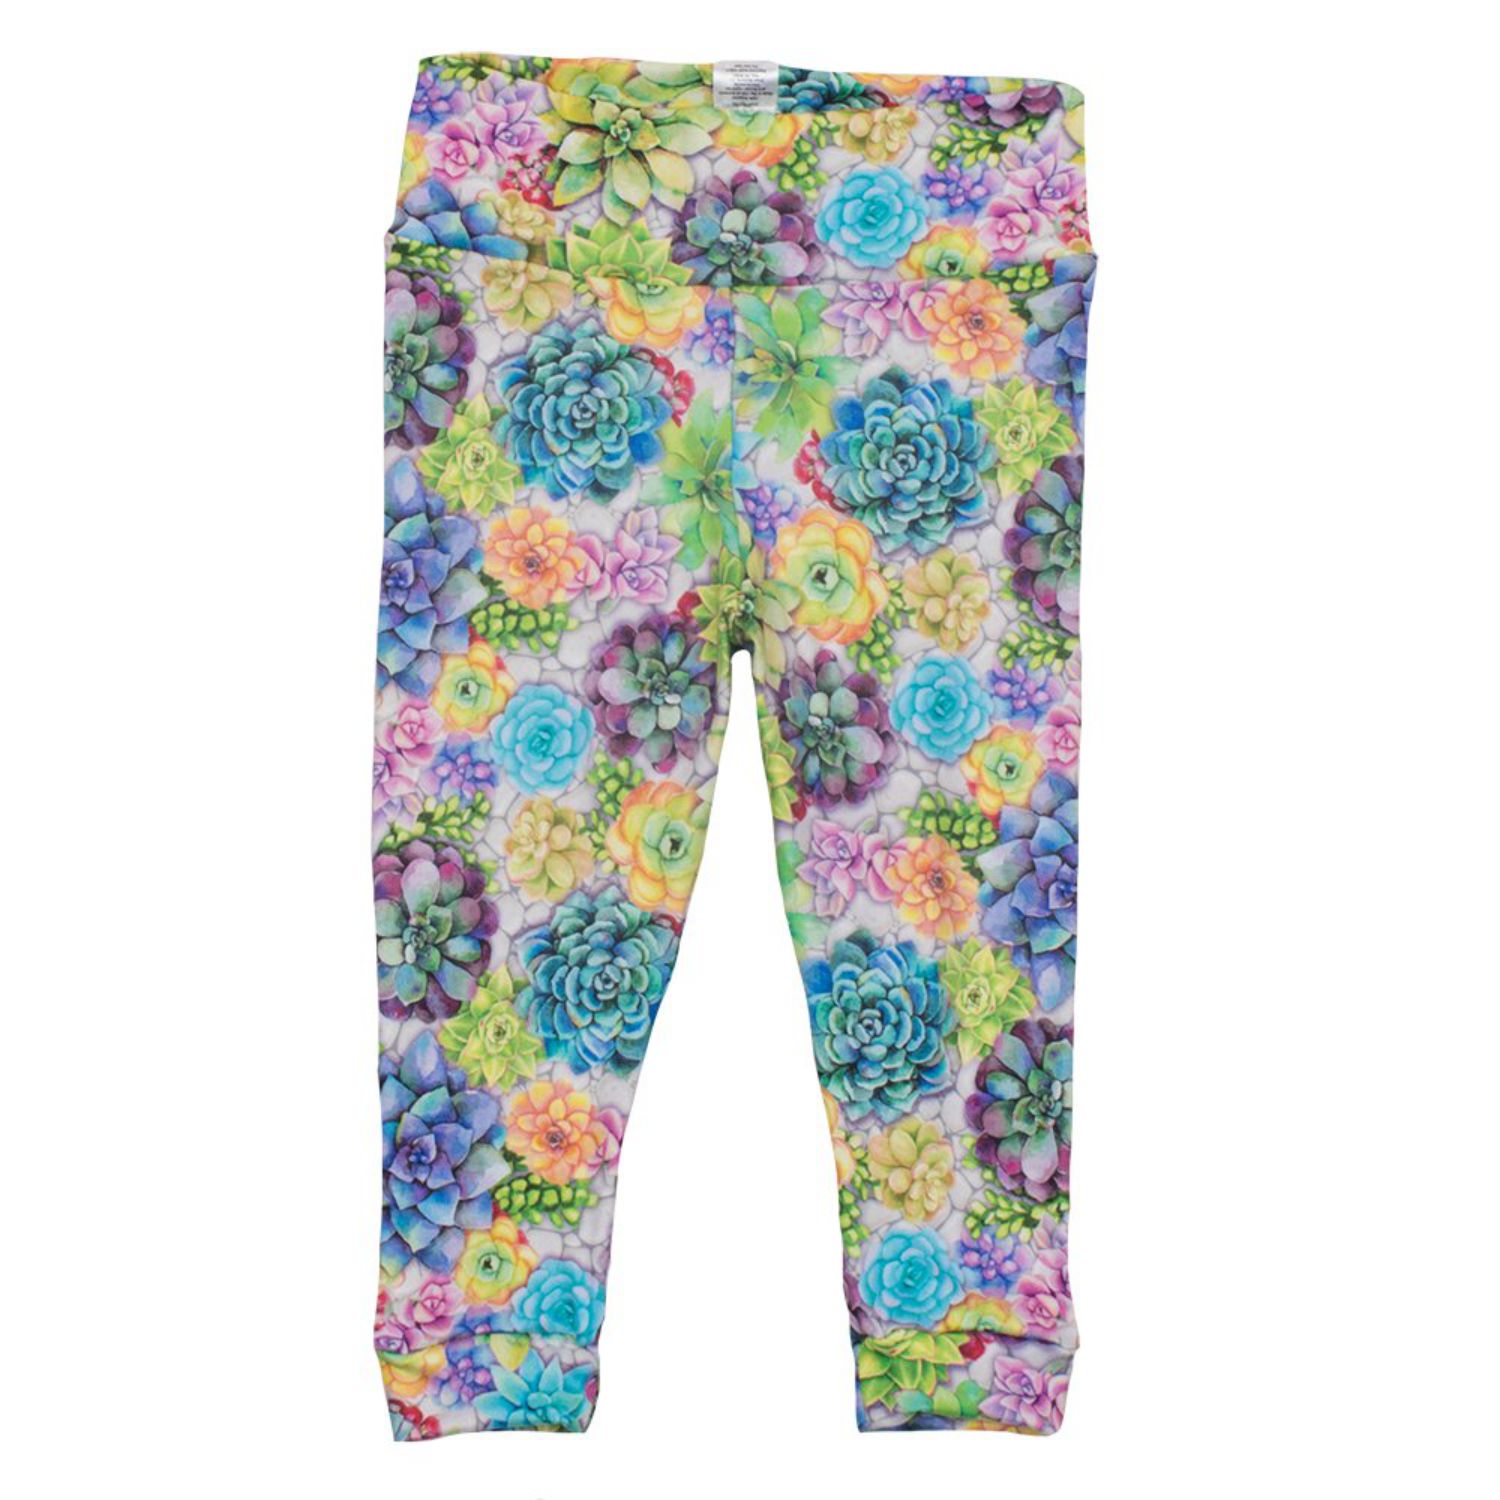 Bumblito Leggings Größe: L (92 - 104) / Muster: Succa for You